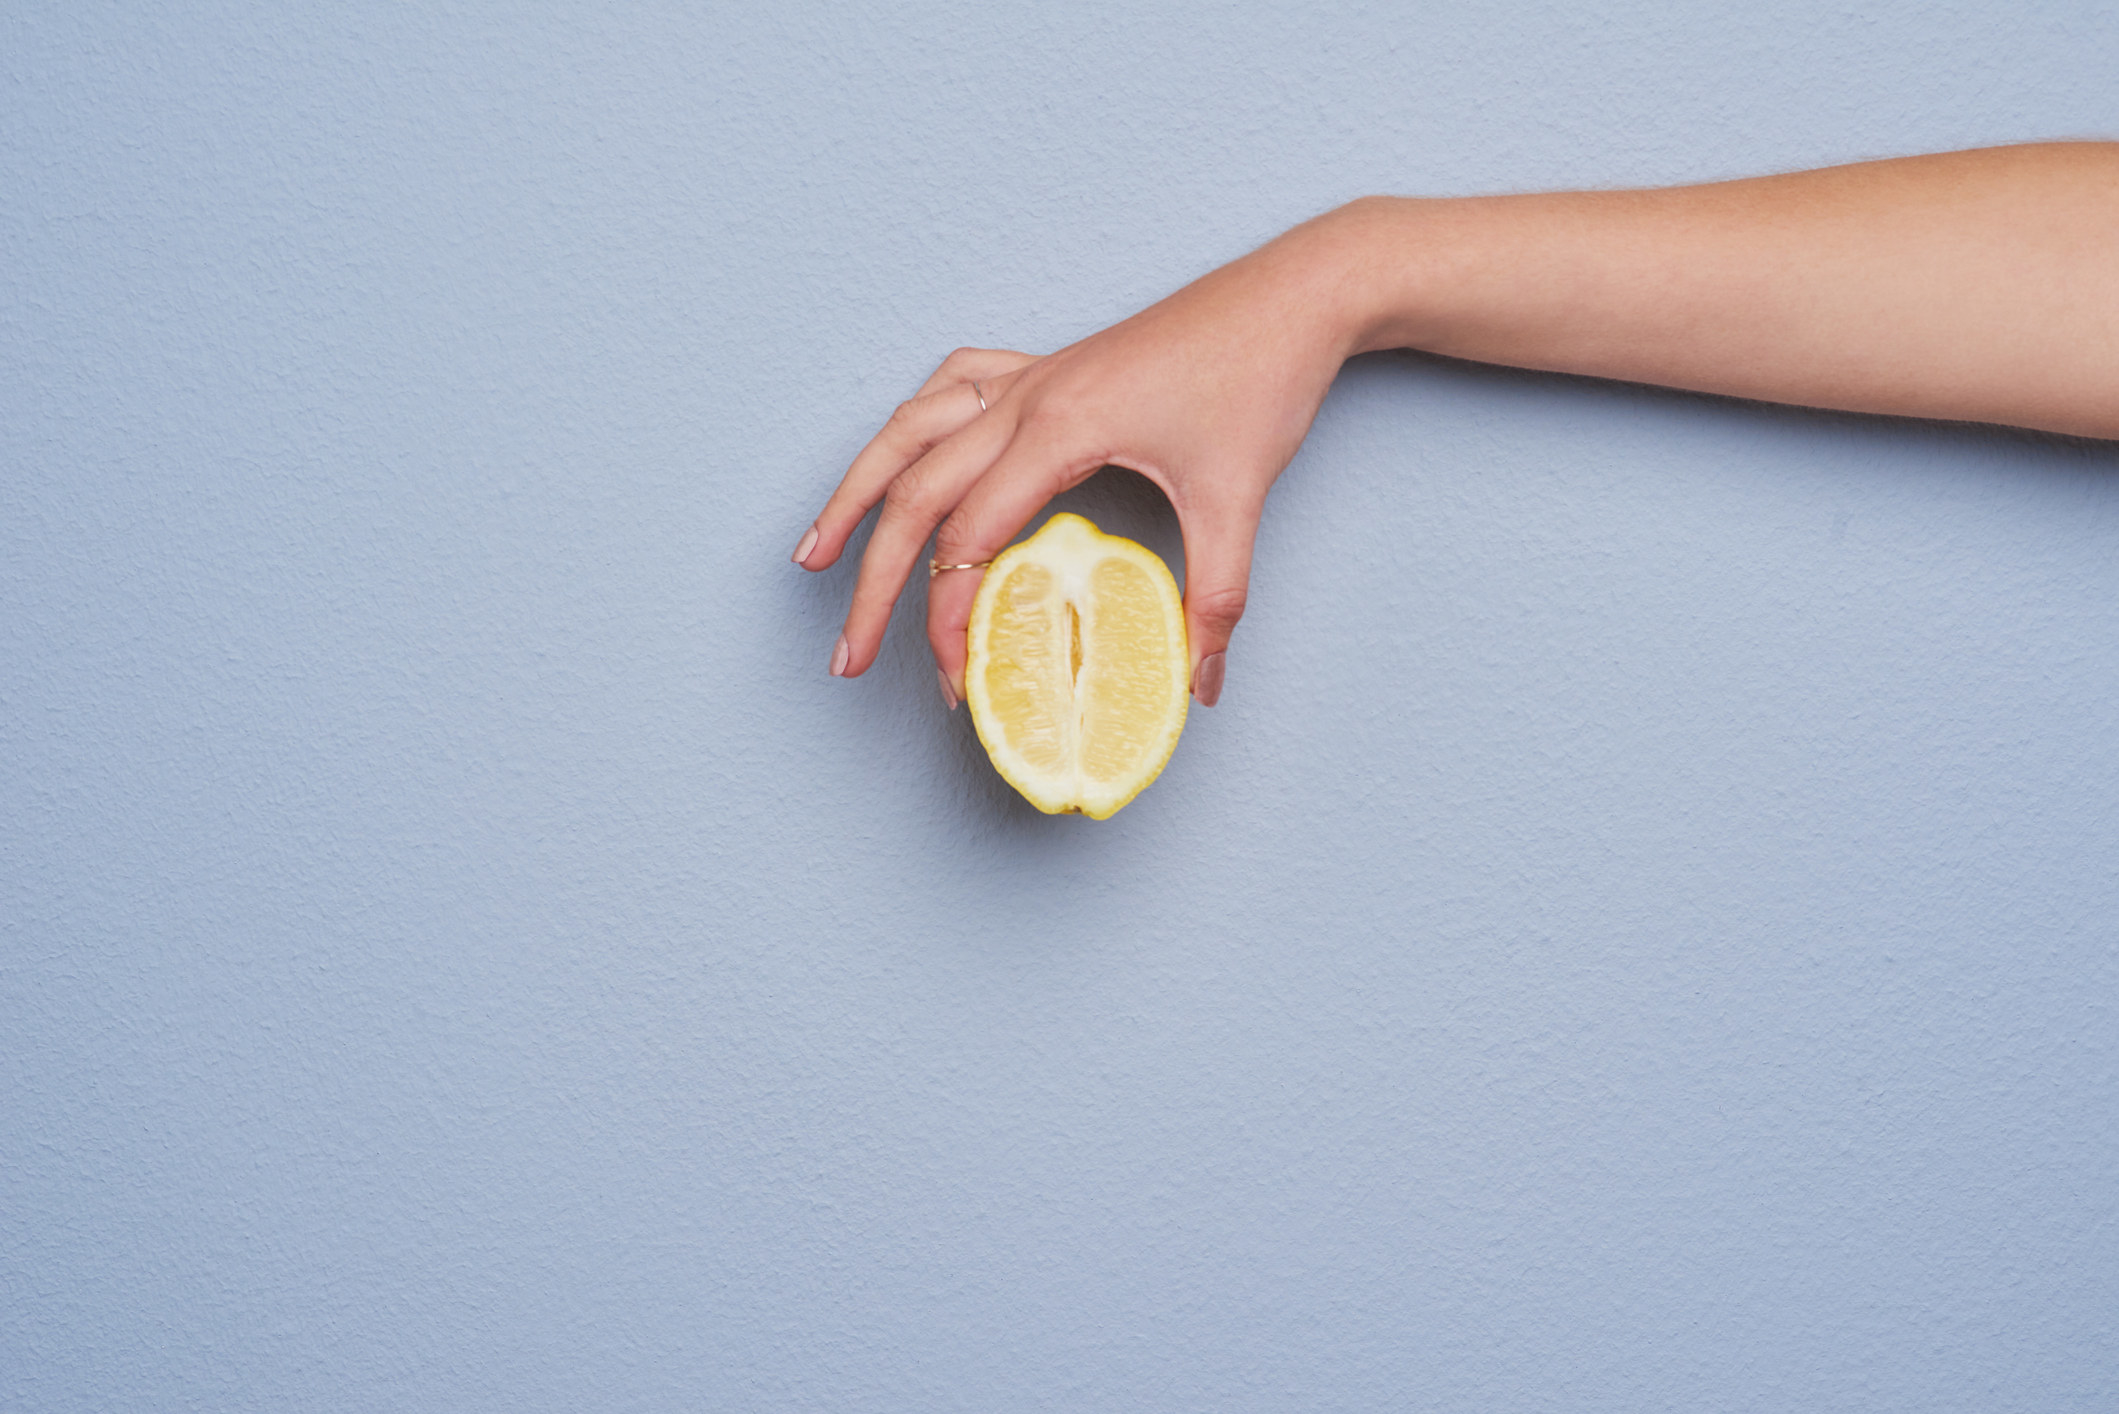 Cropped studio shot of an unrecognizable woman holding a lemon against gray background